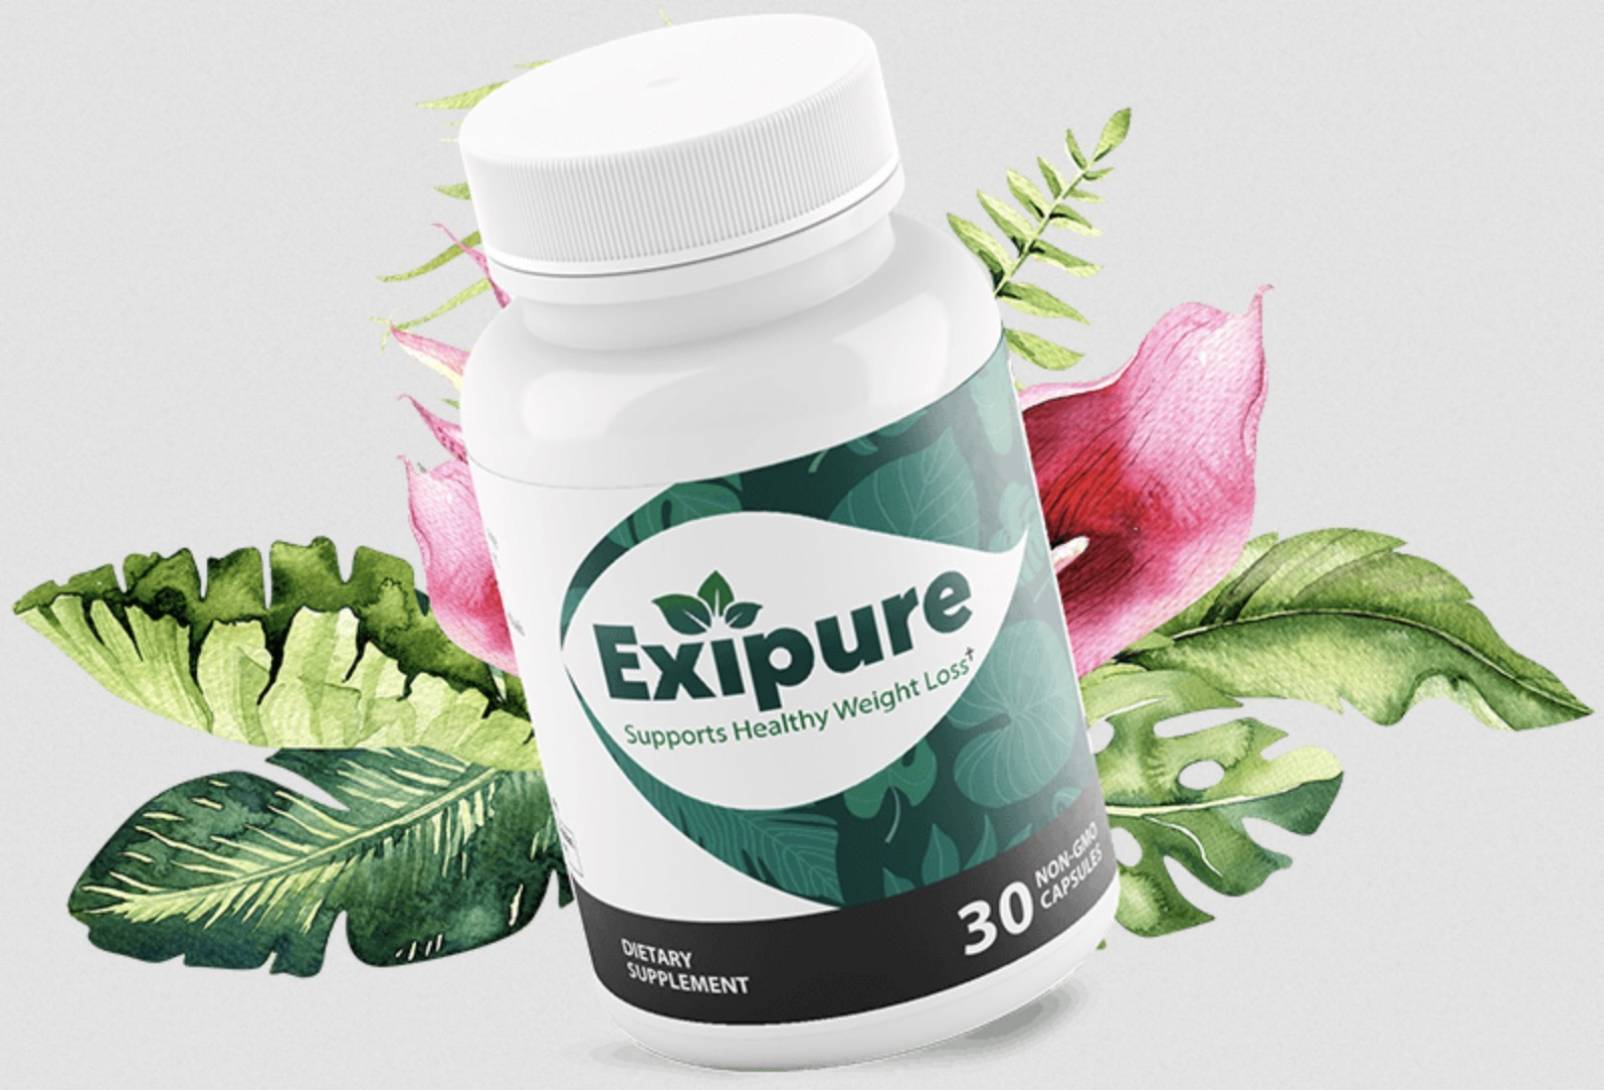 Exipure Weight Loss Supplements